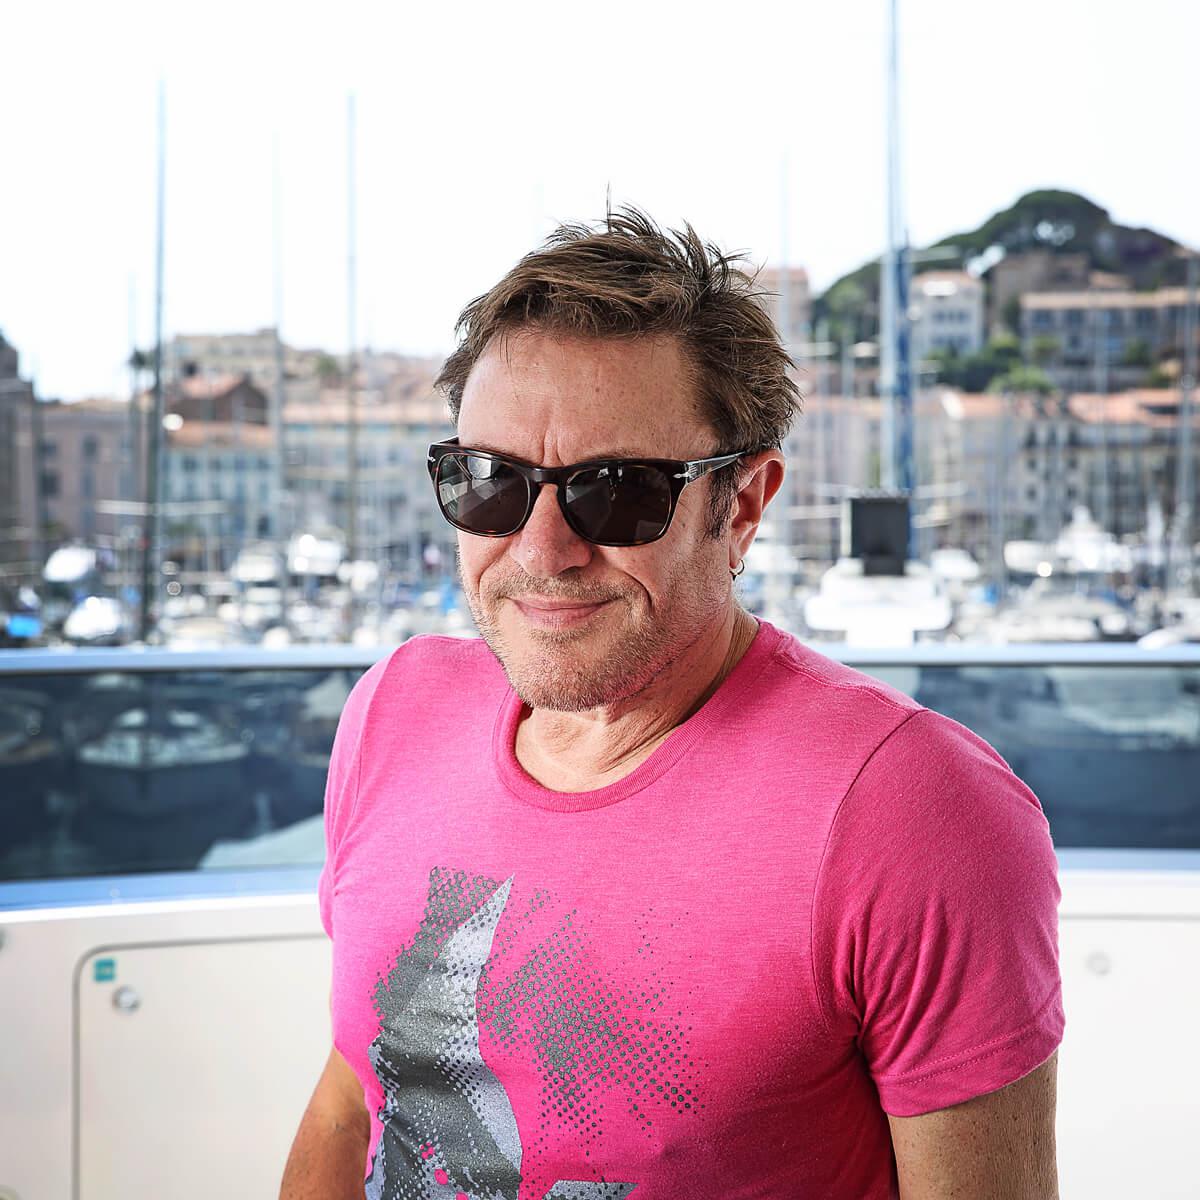 Photograph of Simon Le Bon by Julian Hanford at Cannes Lions Festival of Creativity 2017